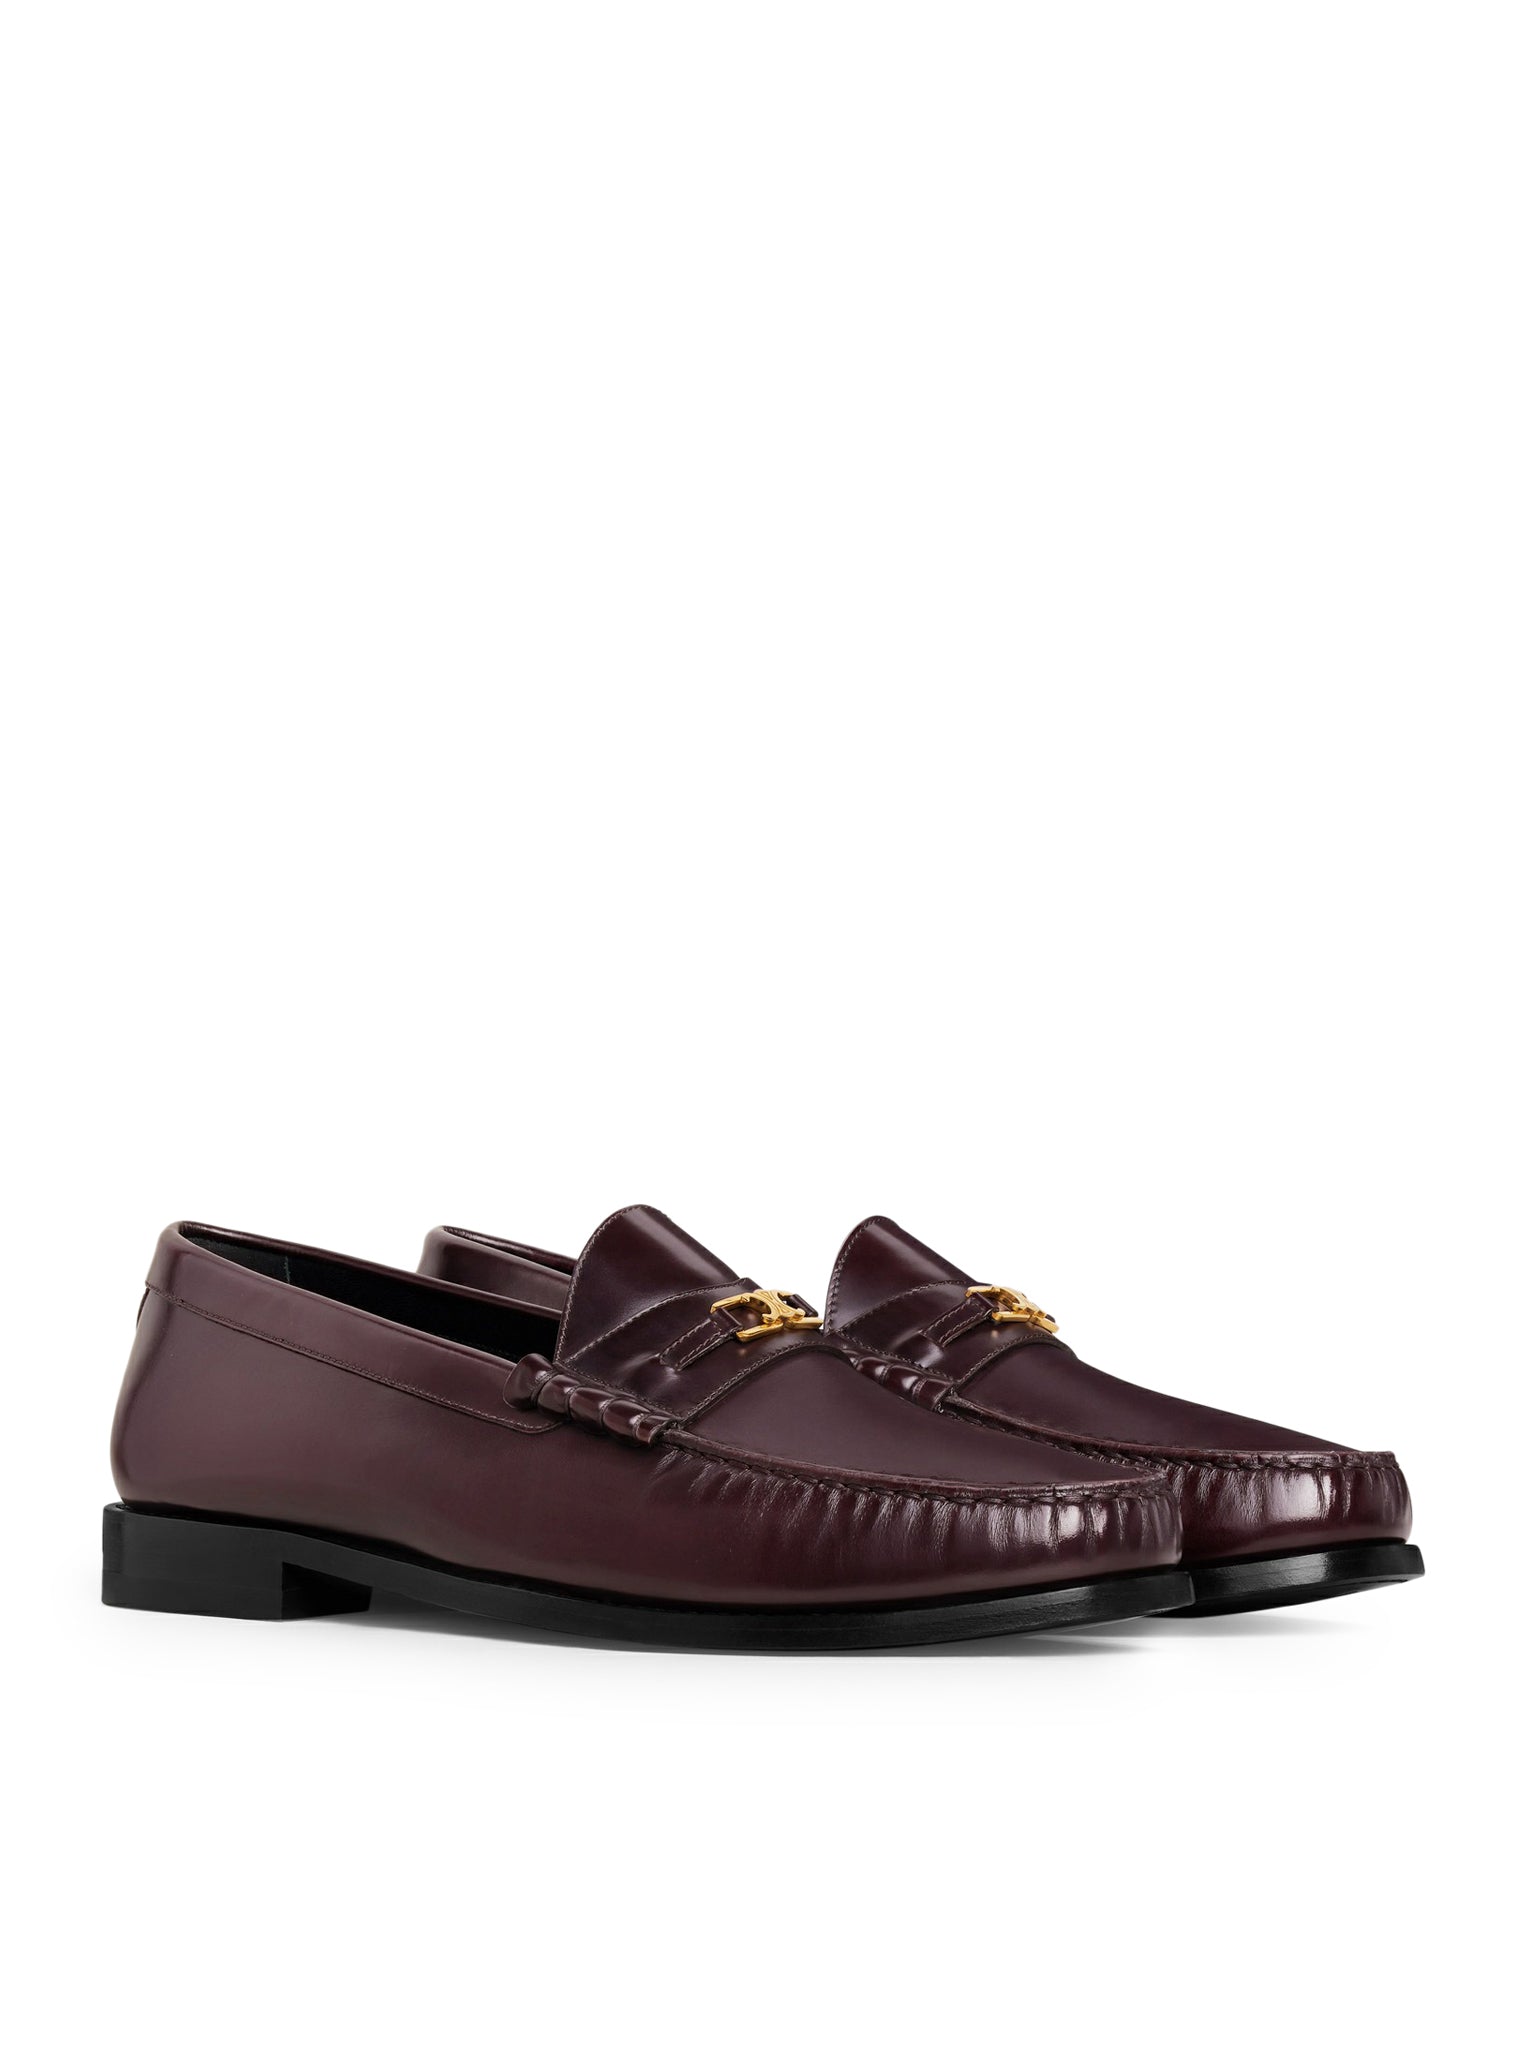 TRIOMPHE LUCO CELINE MOCCASIN IN BORDEAUX POLISHED BULL LEATHER